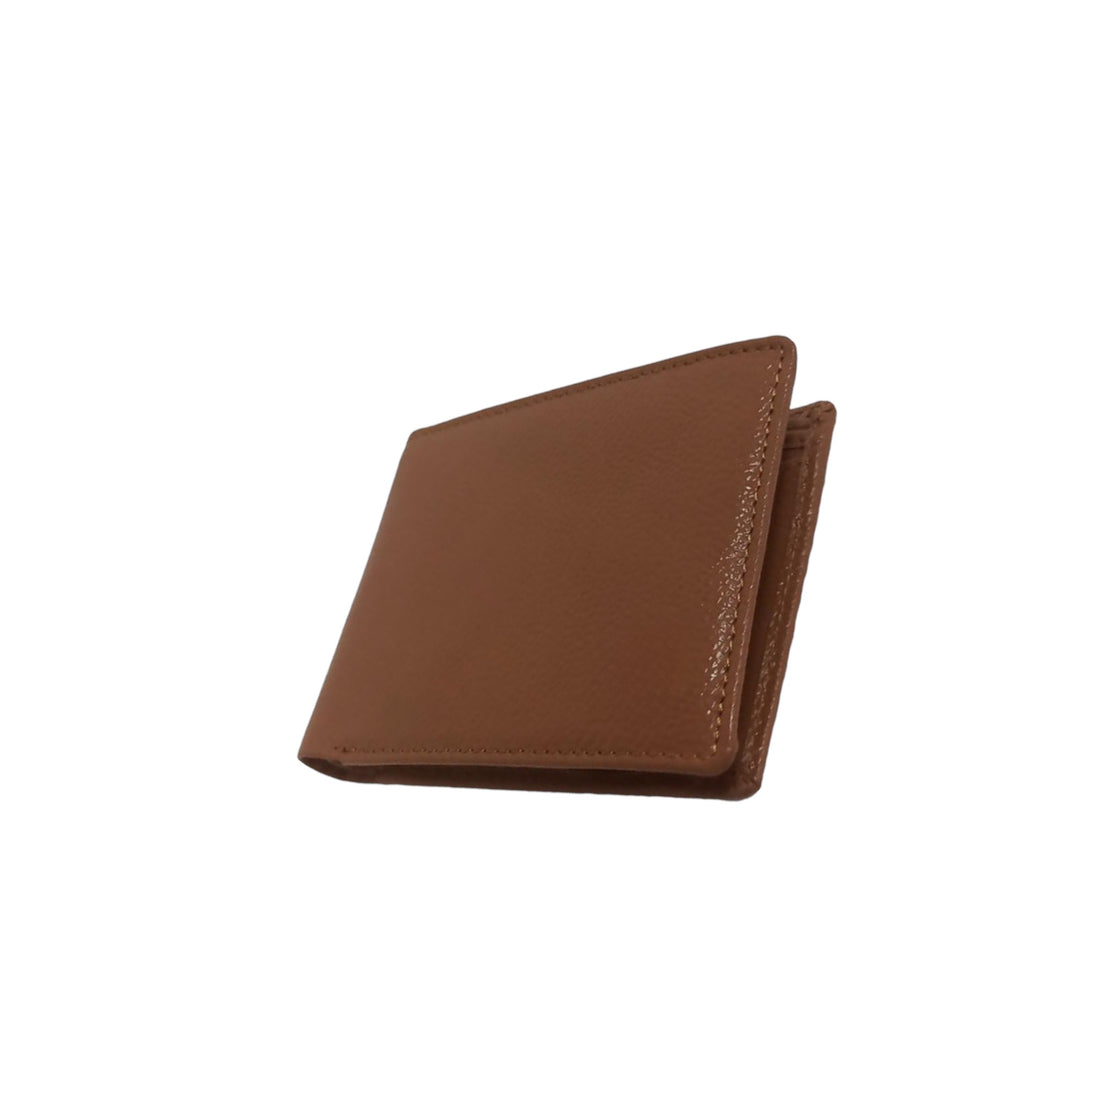 Mens Bifold leather wallet with coin pocket